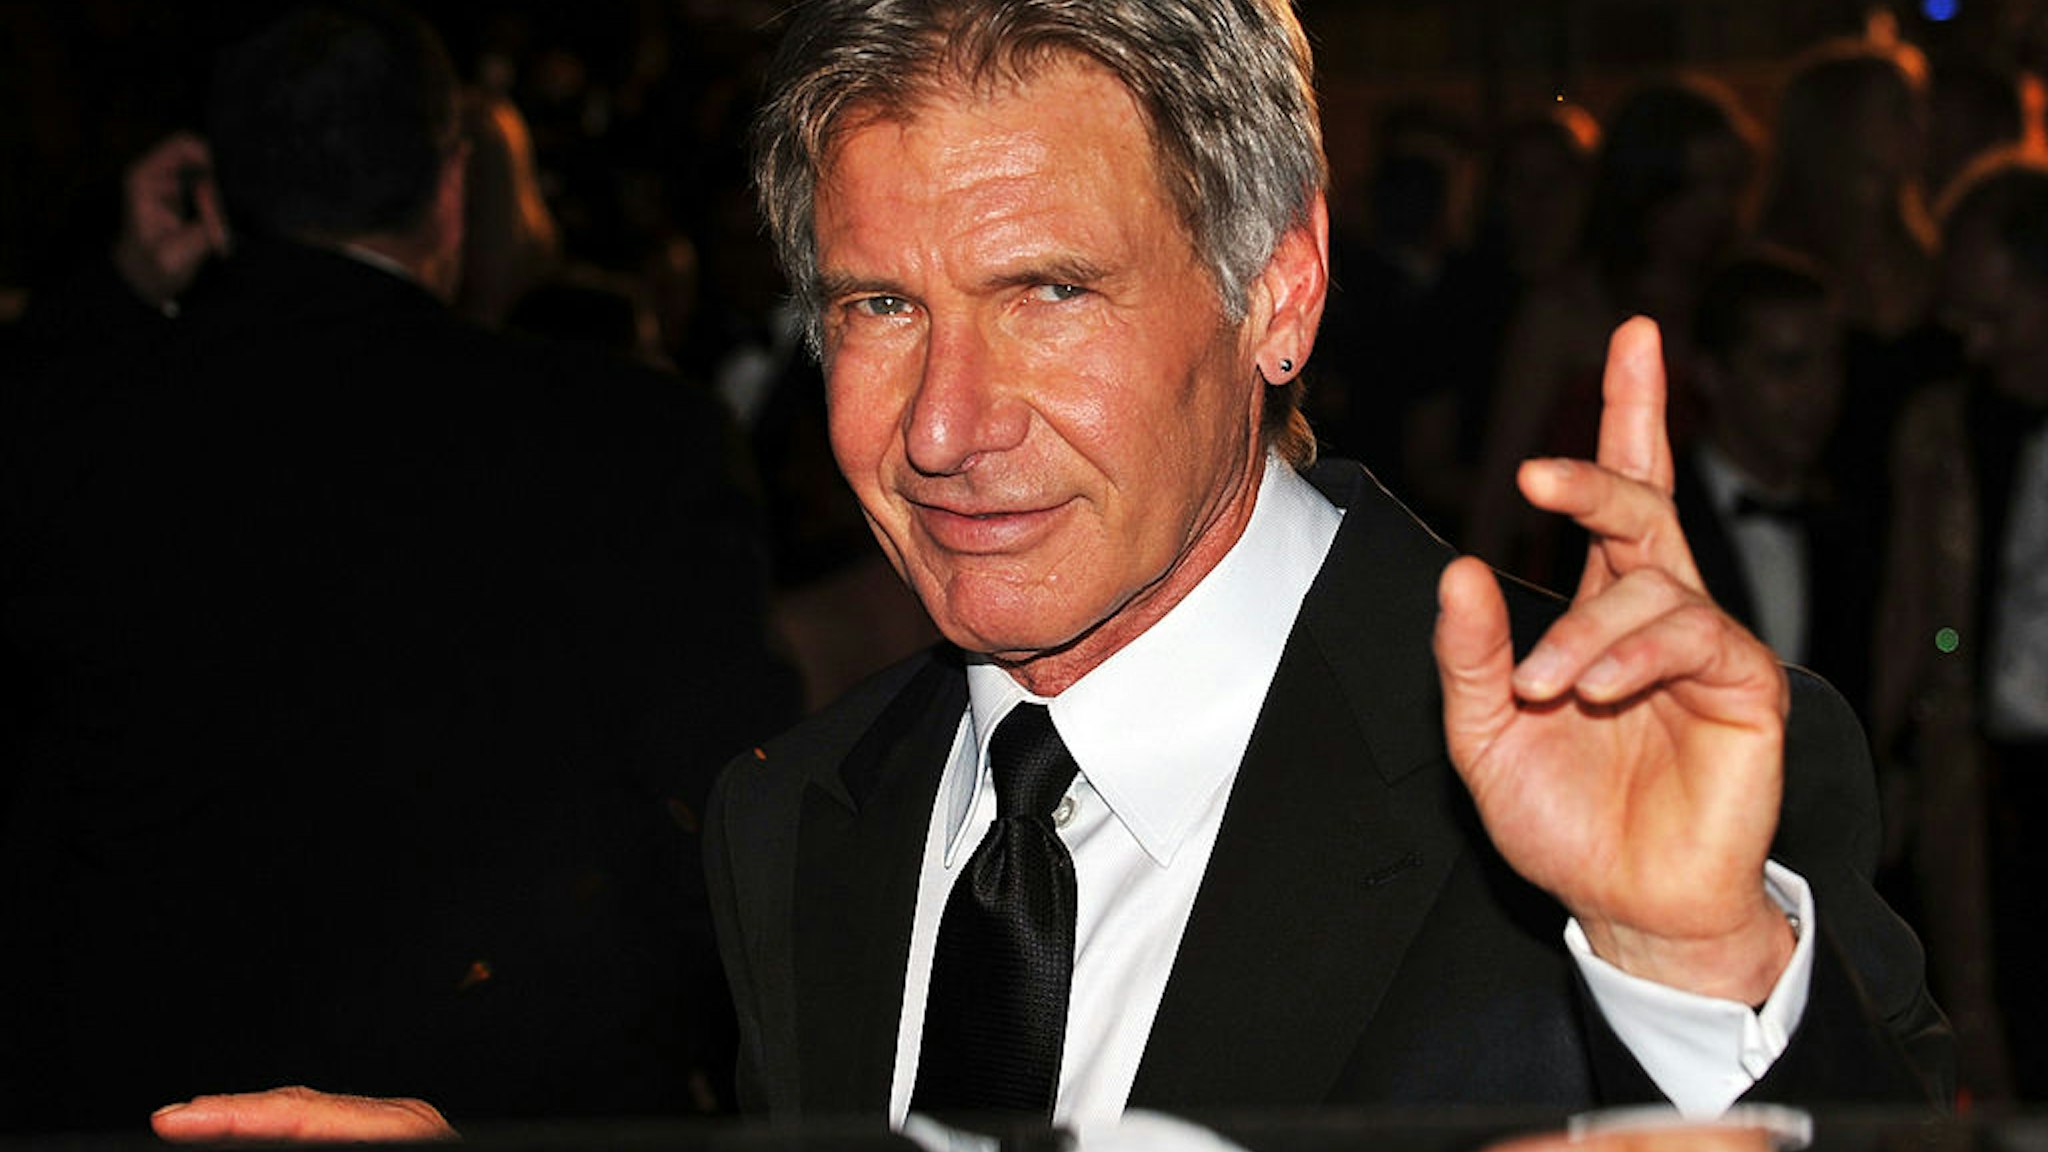 CANNES, FRANCE - MAY 18: Actor Harrison Ford departs after the Indiana Jones and The Kingdom of The Crystal Skull Premiere at the Palais des Festivals during the 61st International Cannes Film Festival on May 18 , 2008 in Cannes, France. (Photo by Pascal Le Segretain/Getty Images)